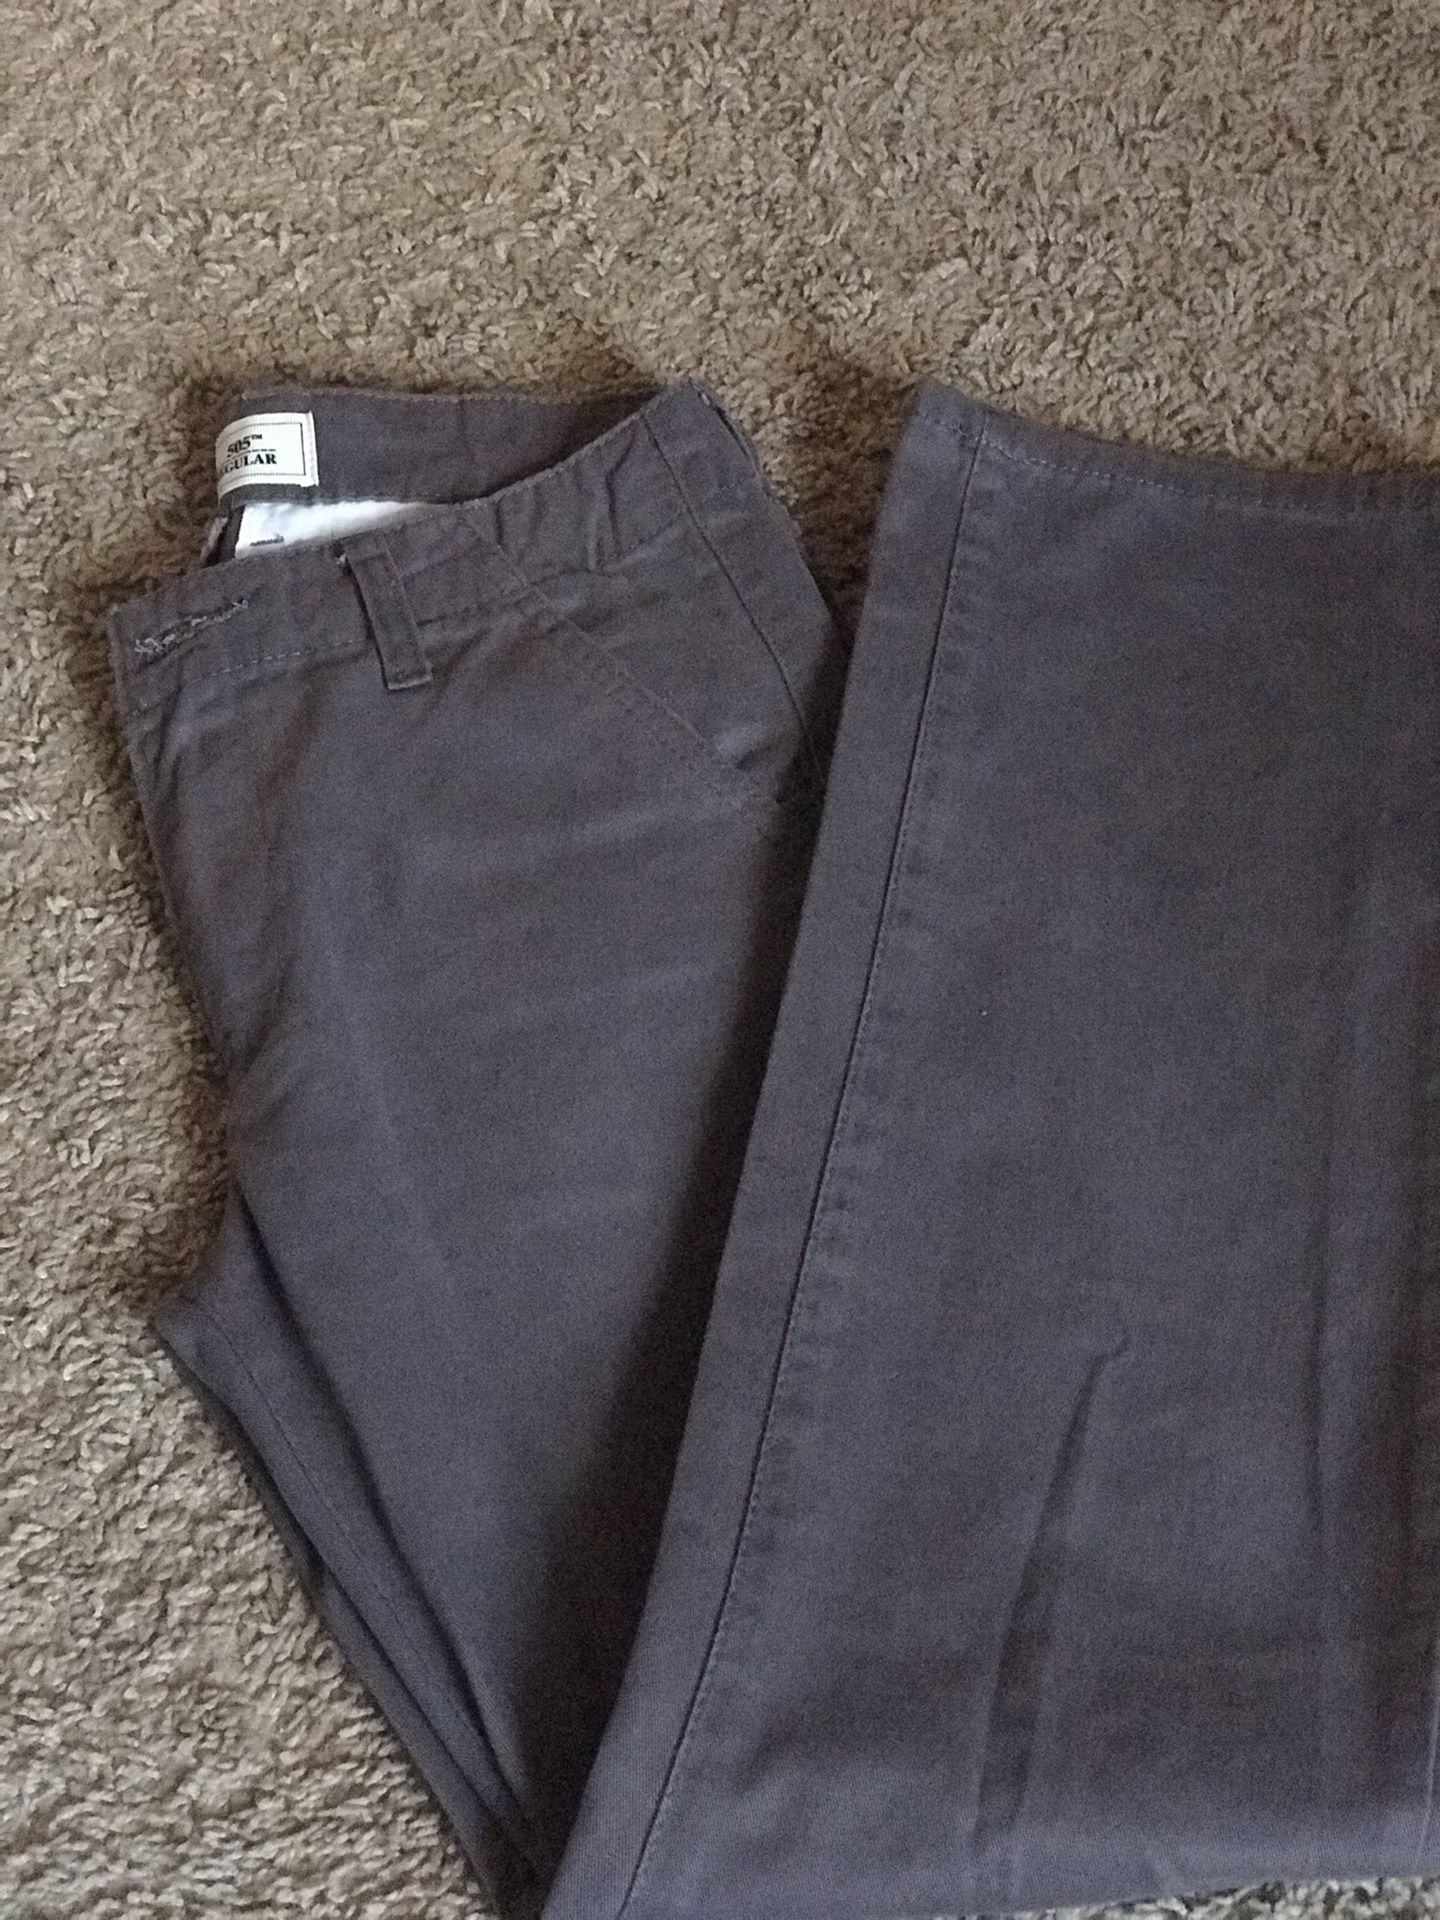 4 Boys SIZE 12 Pants. Levi’s , Good Quality. $30 (all 4) OBO. MAKE AN OFFER. Need Gone Quick